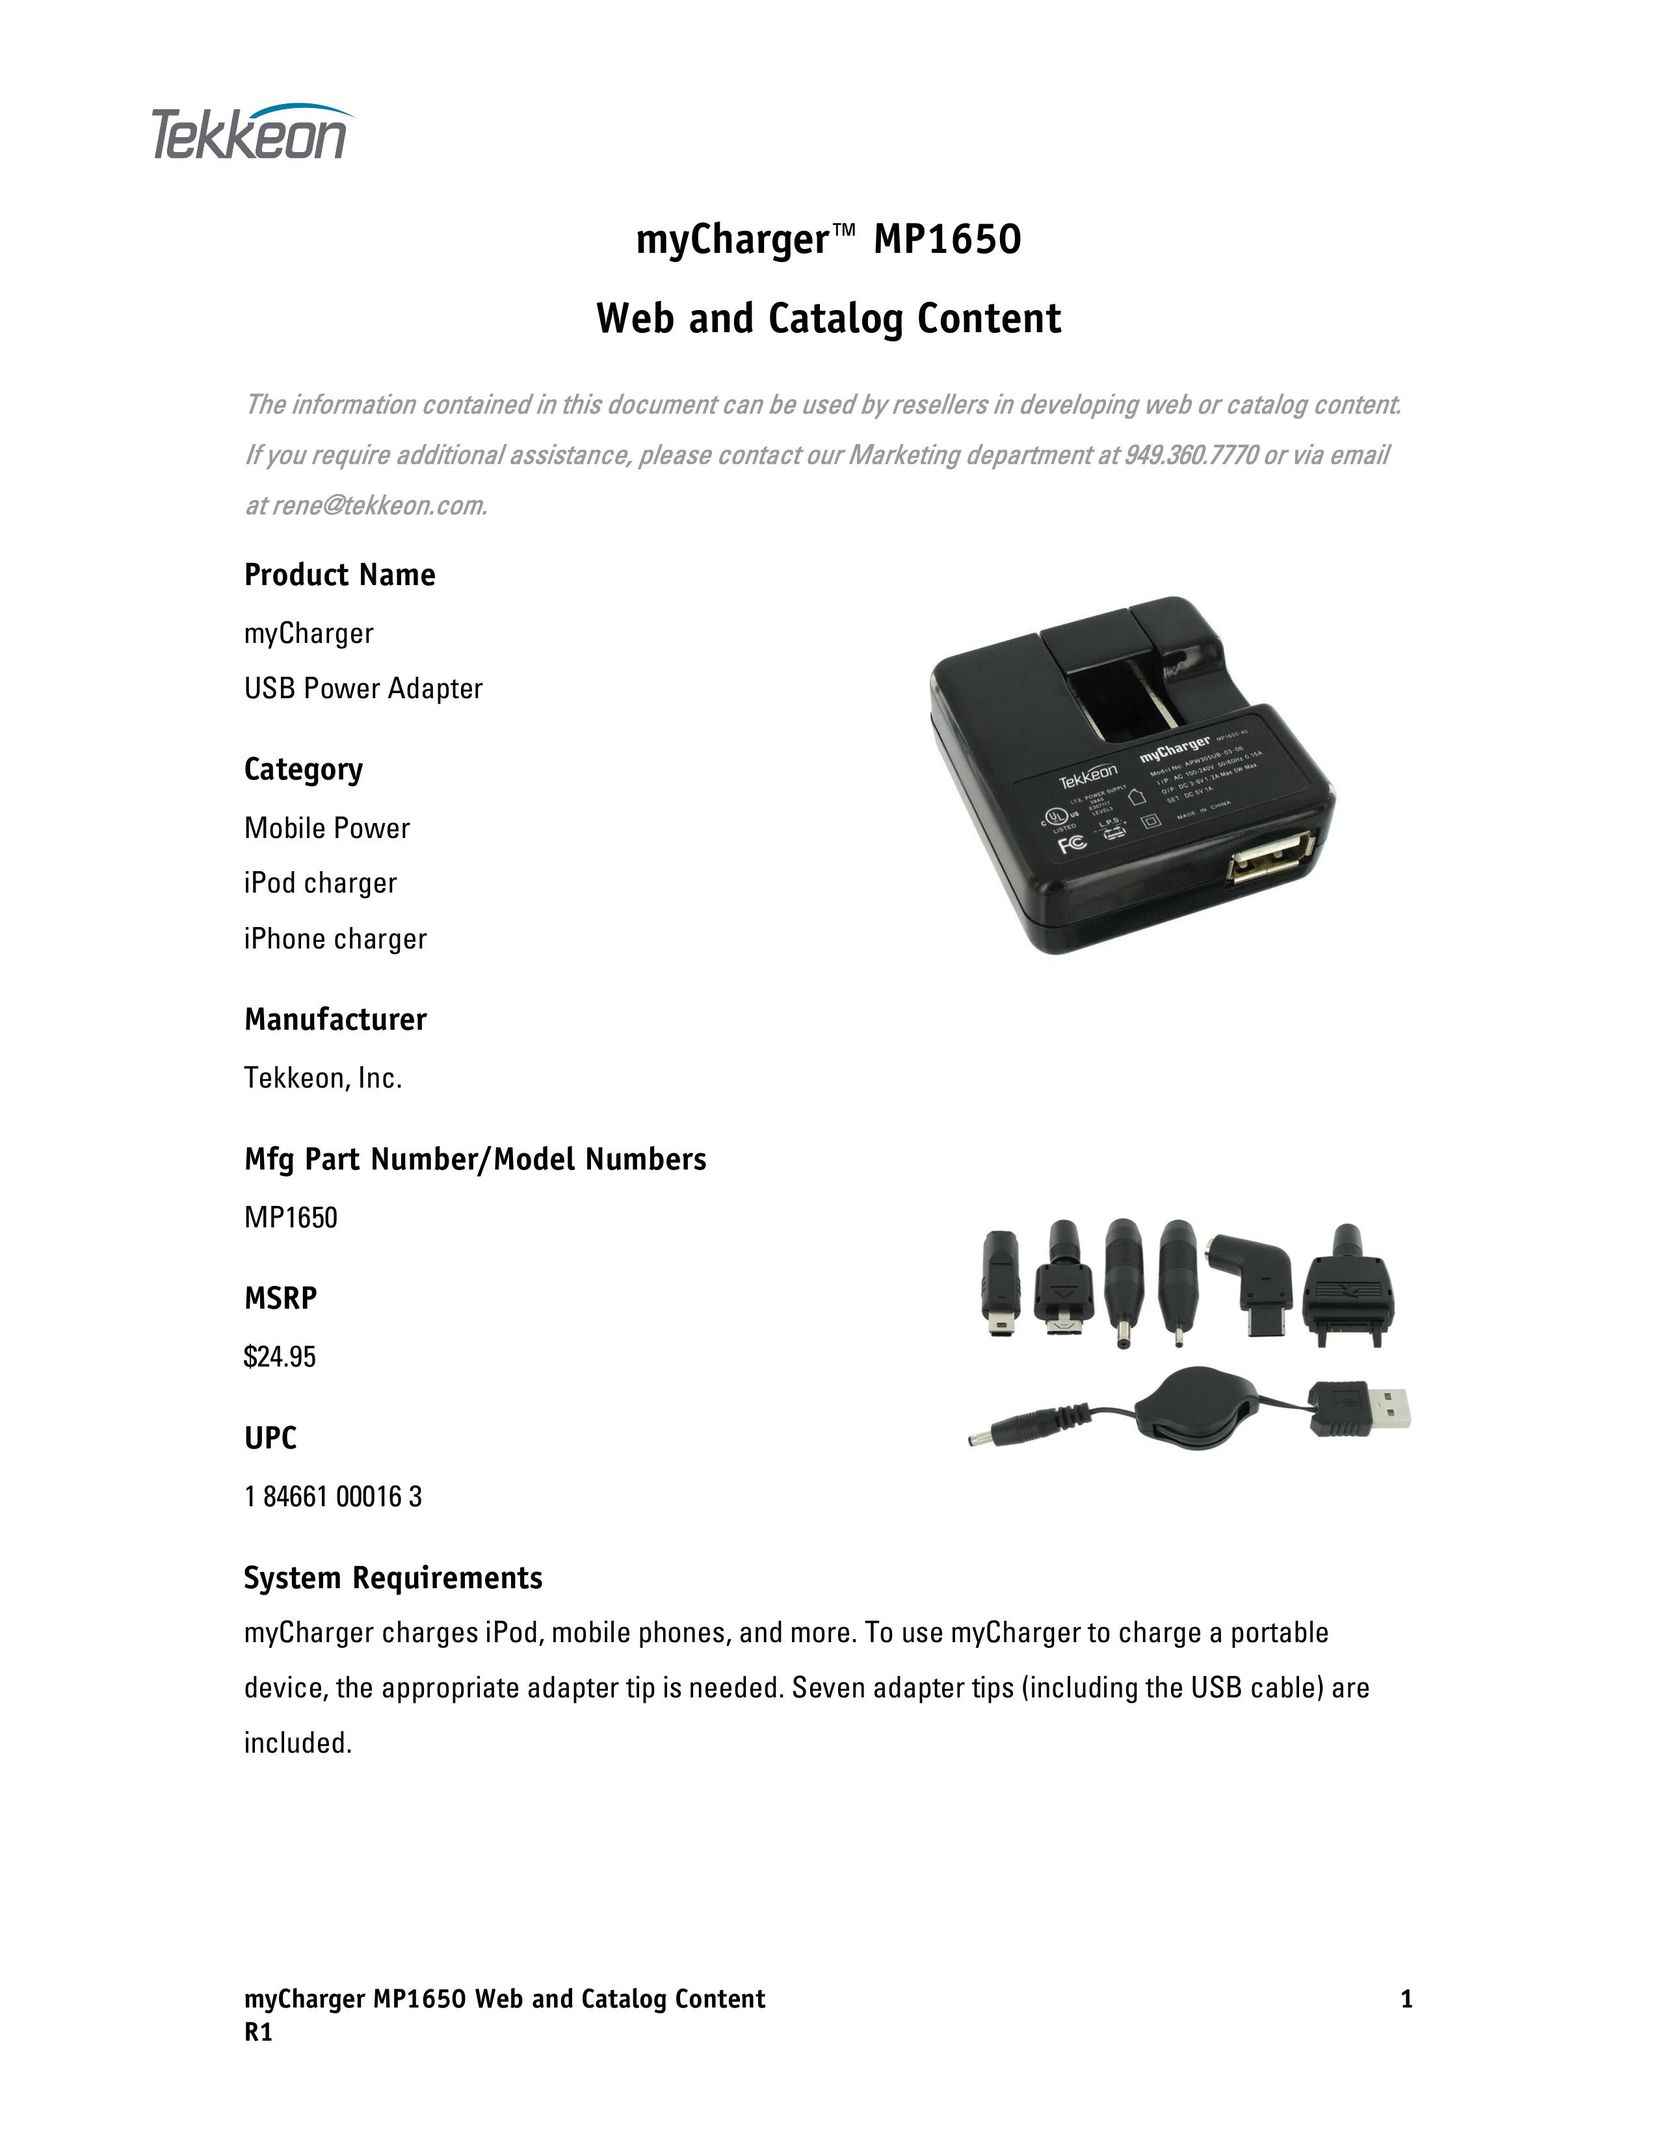 Tekkeon HX6730 Battery Charger User Manual